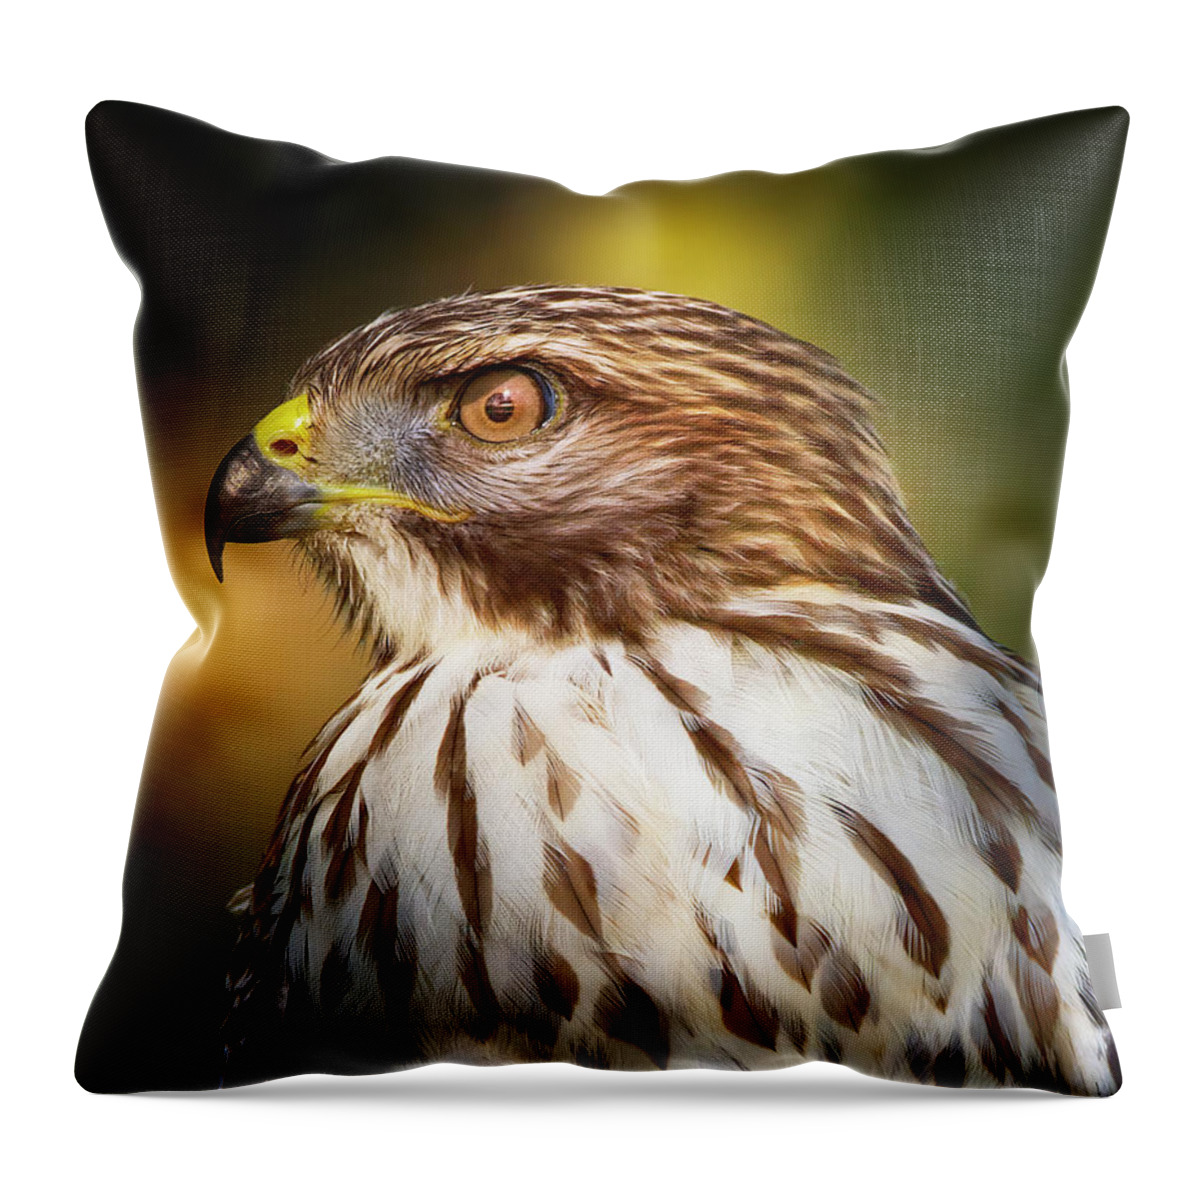 Red Shouldered Hawk Throw Pillow featuring the photograph Red Shouldered Hawk Close Up by Mark Andrew Thomas